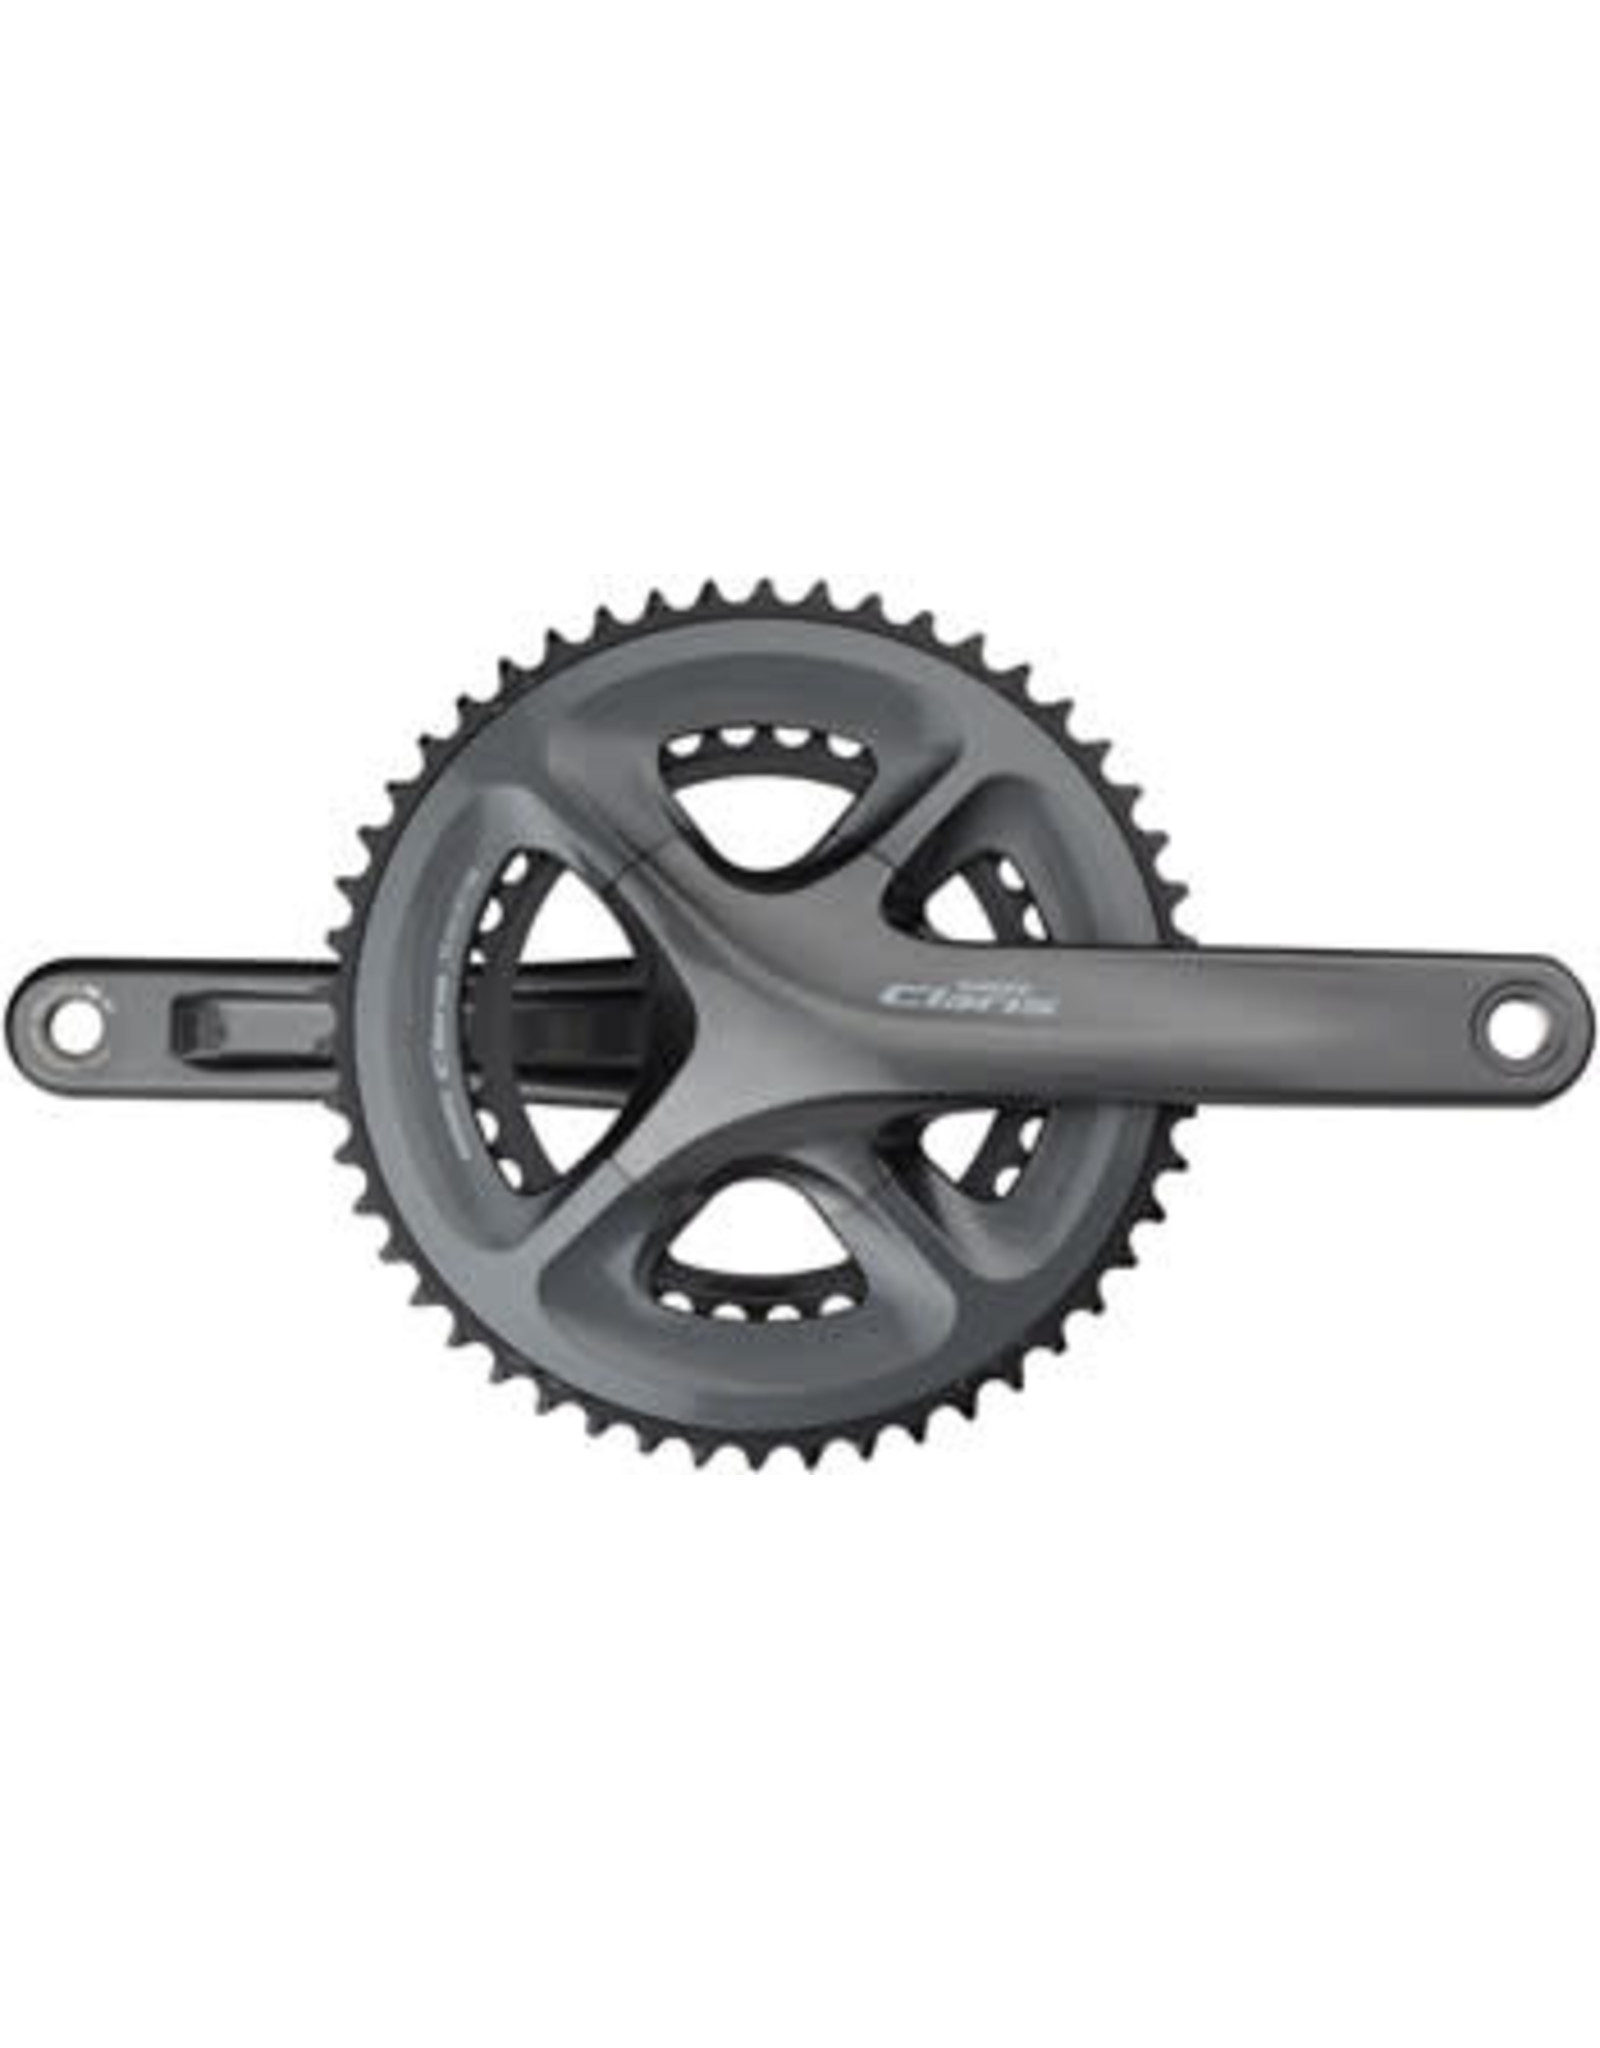 Shimano Shimano Claris FC-R2000 Crankset - 170mm, 8-Speed, 50/34t, 110 BCD, Hollowtech II Spindle Interface, Black